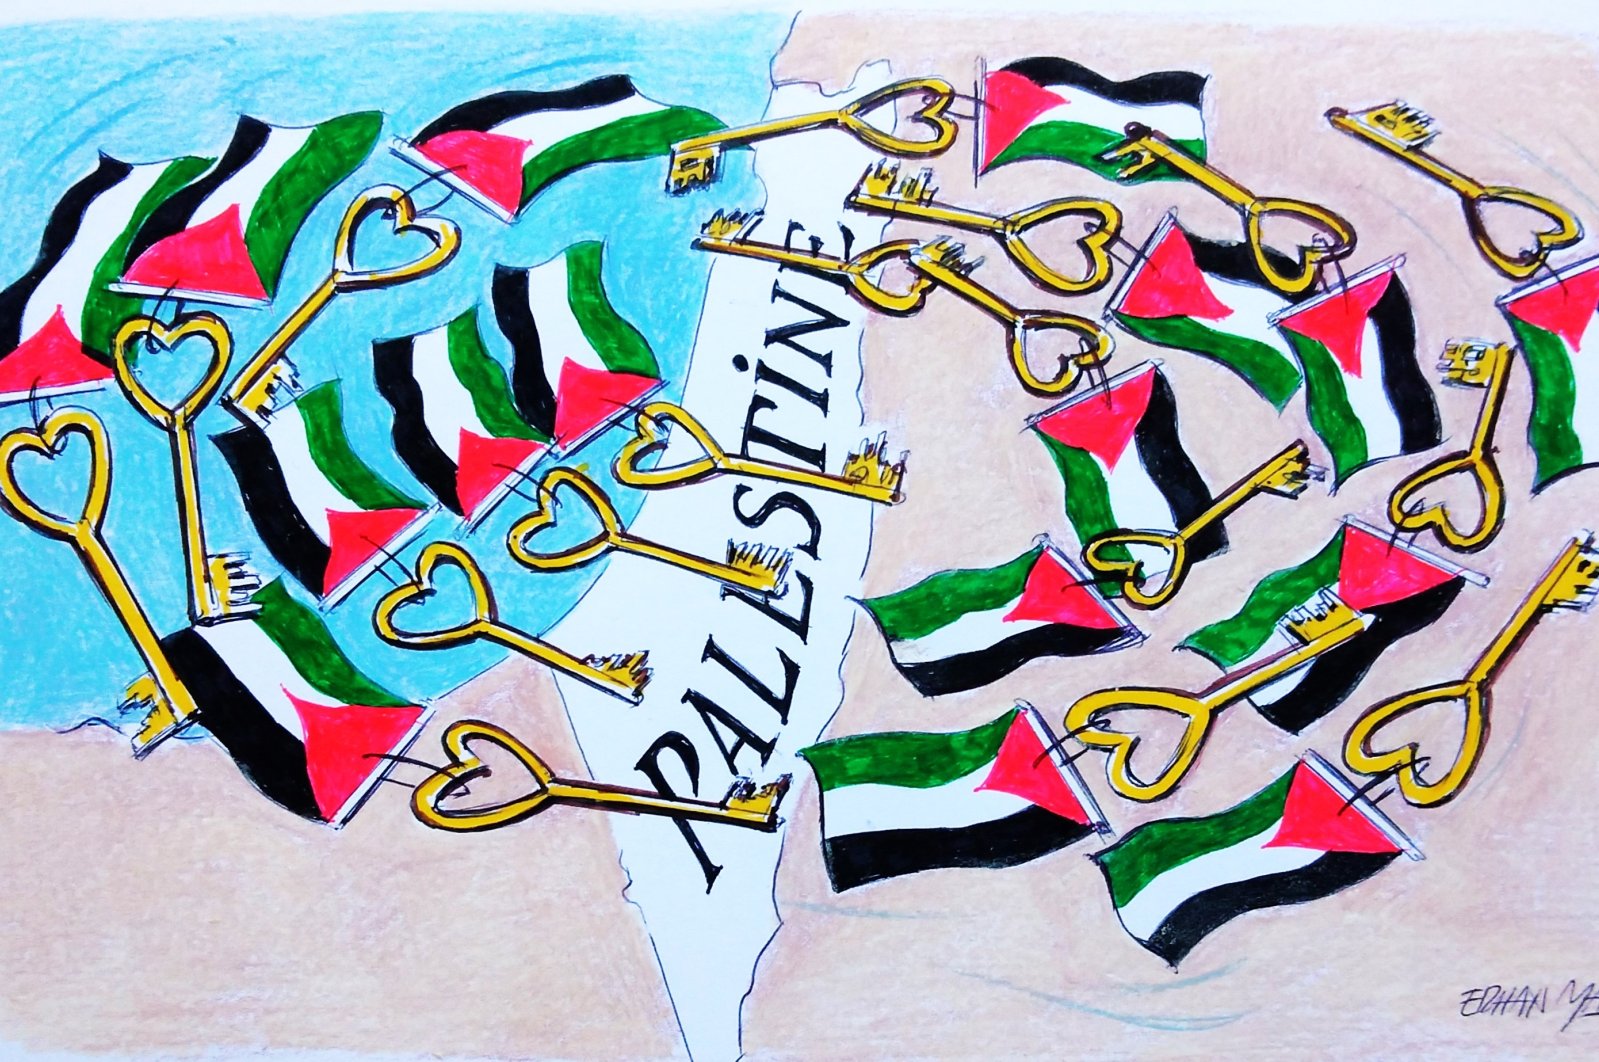 "The keys that Palestinians have held on to for generations may not have opened the doors to their homes yet, but they have opened the hearts of those who were previously deaf and blind to the truth in many parts of the world." (Illustration by Erhan Yalvaç)